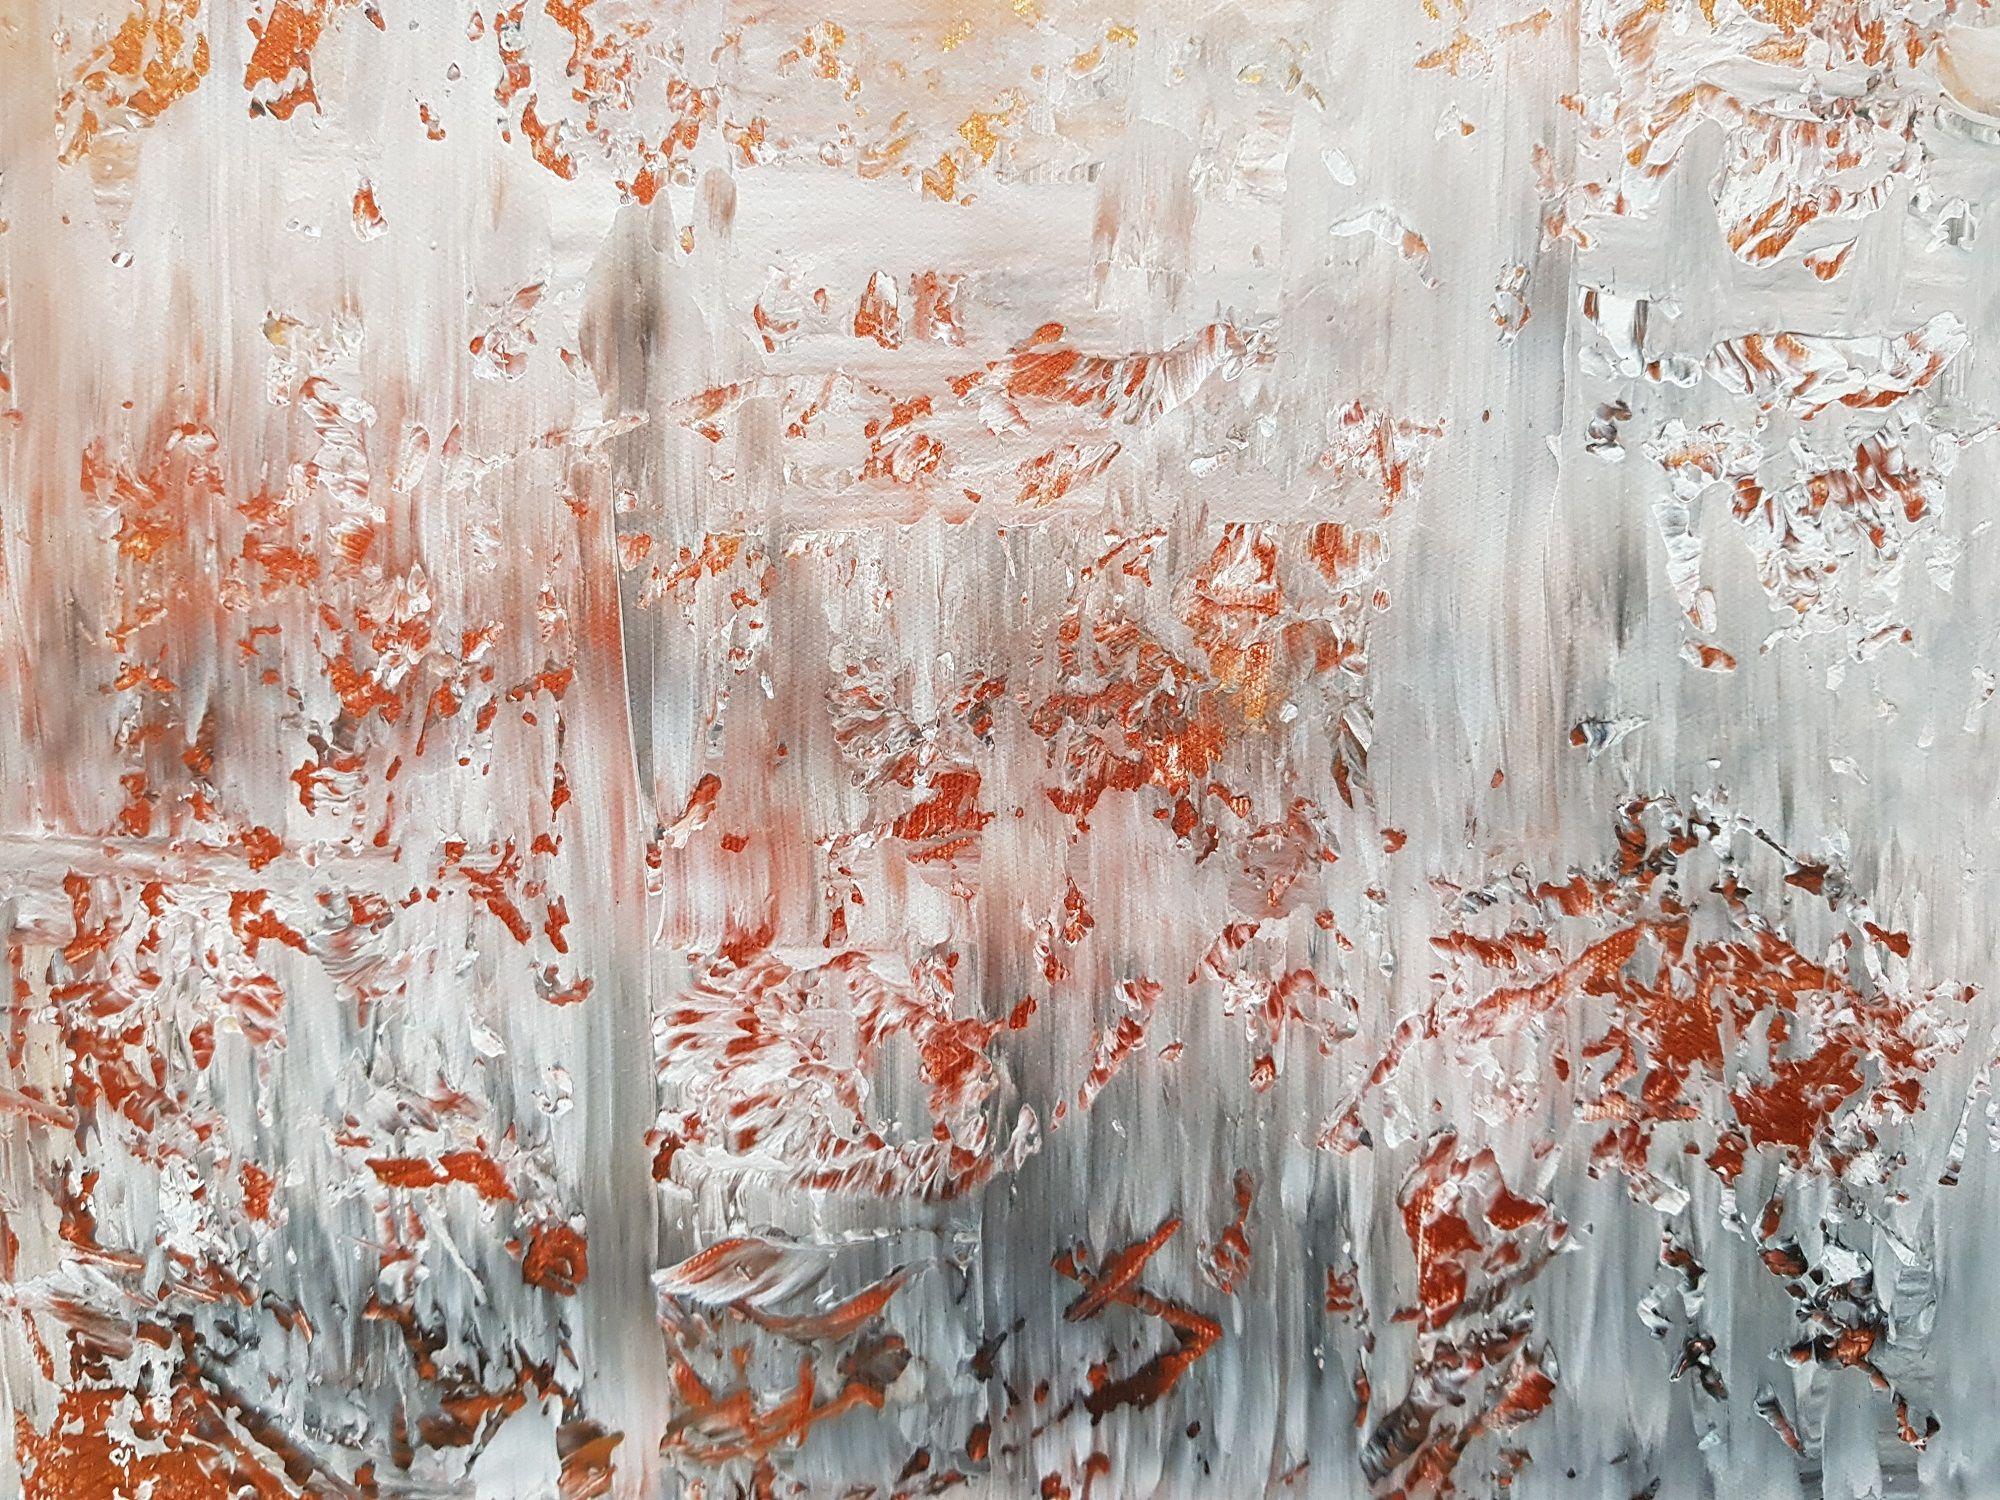 Northen wind, Painting, Acrylic on Canvas - Beige Abstract Painting by Ivana Olbricht